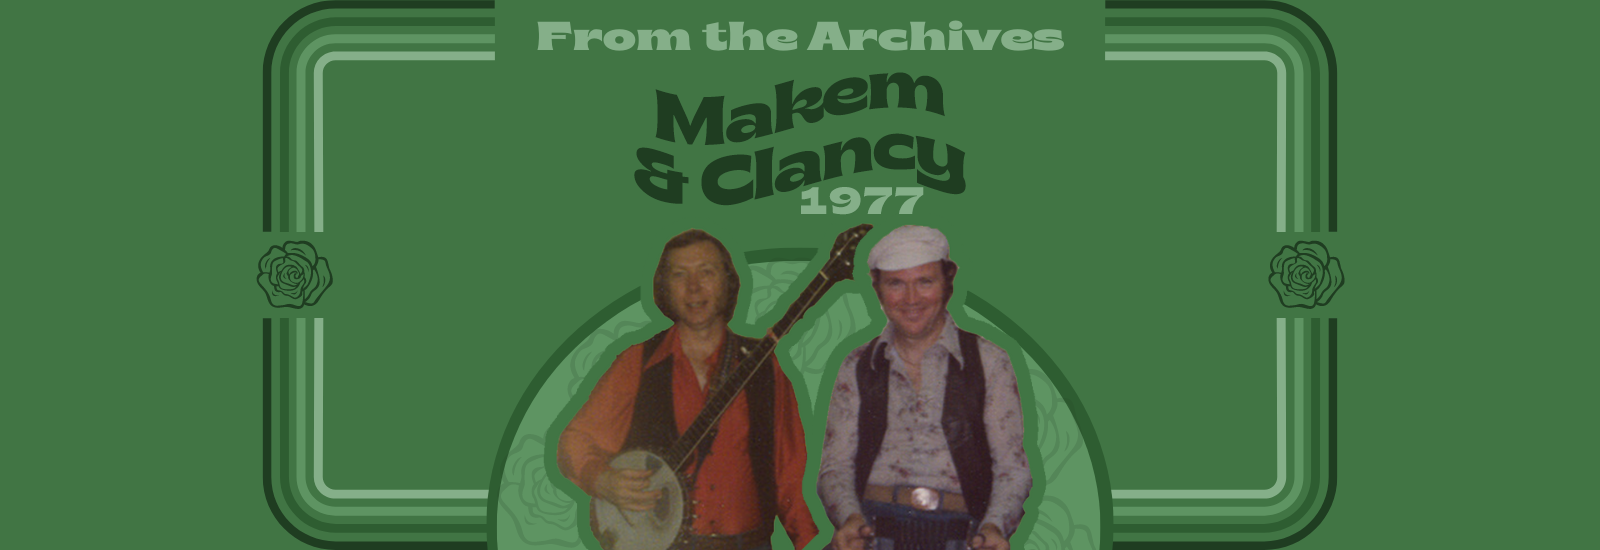 Makem and Clancy 1977